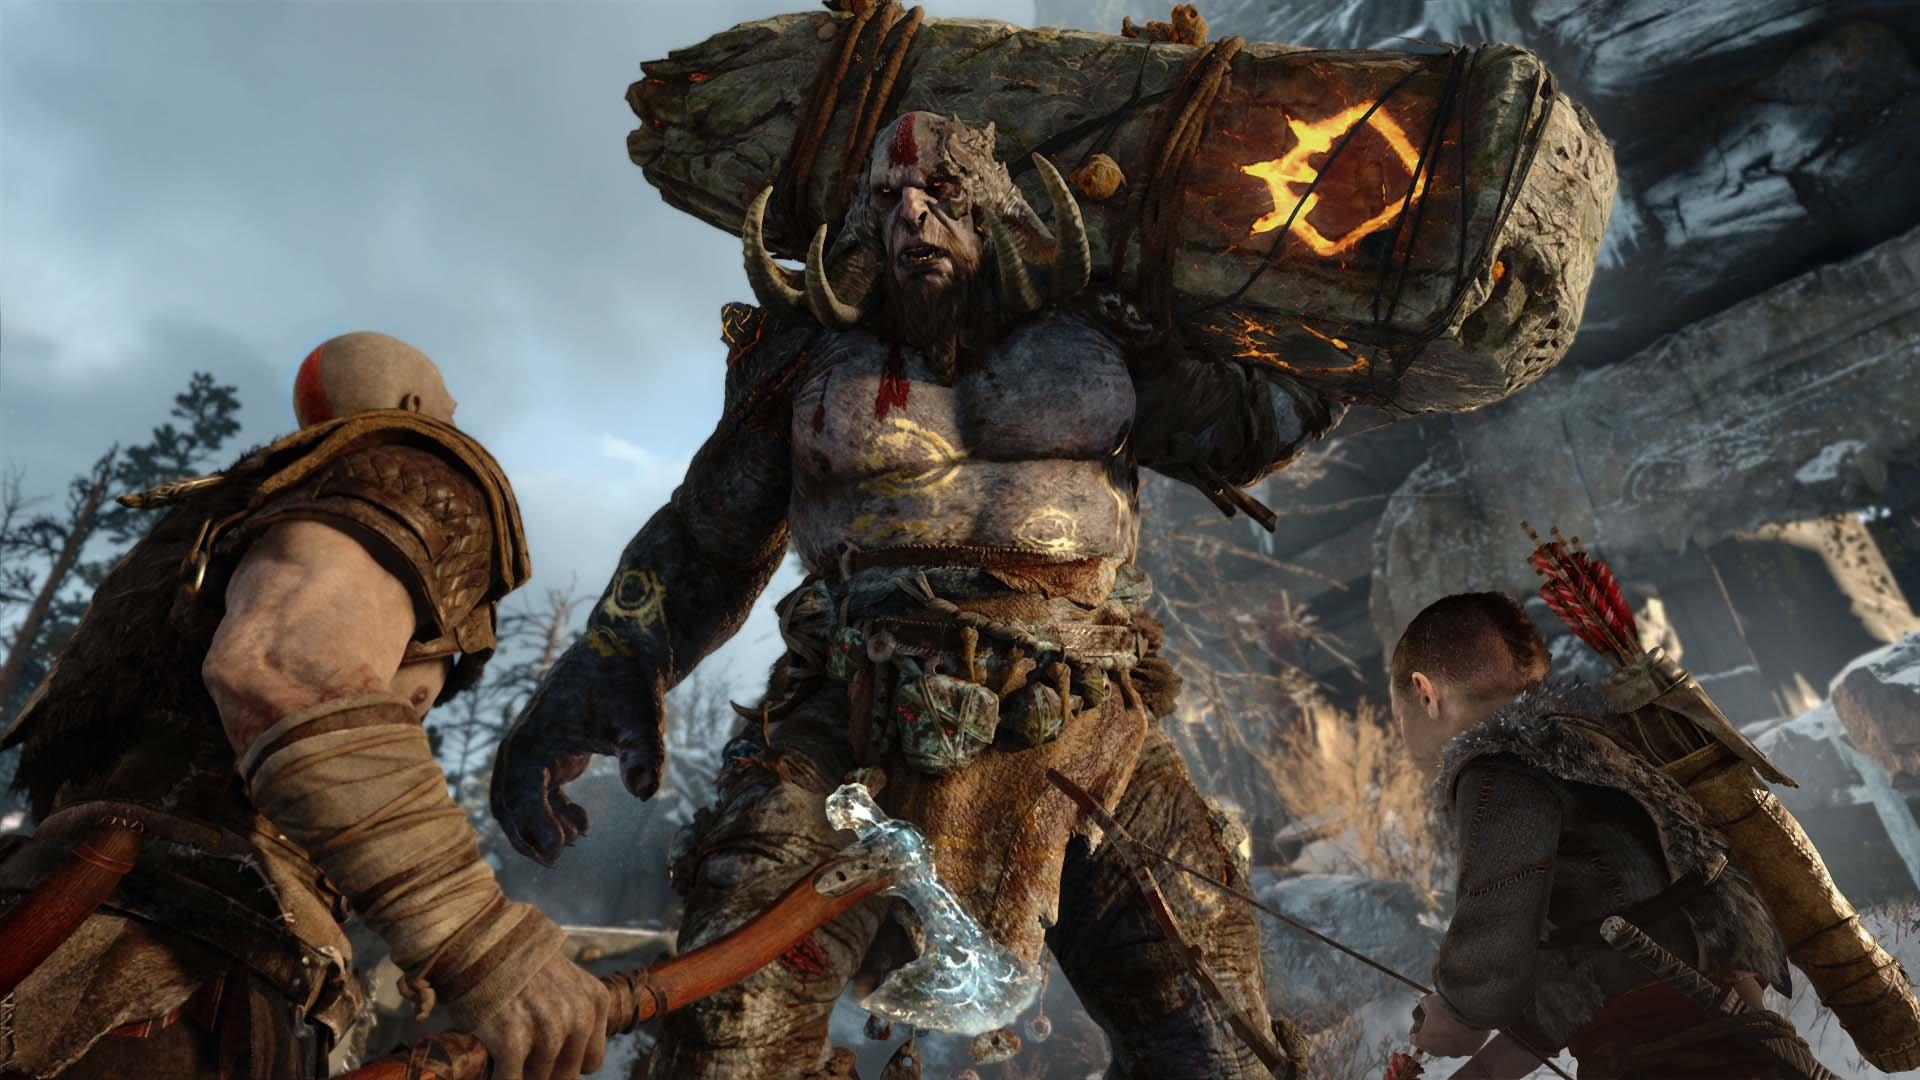 god of war ps4 play store